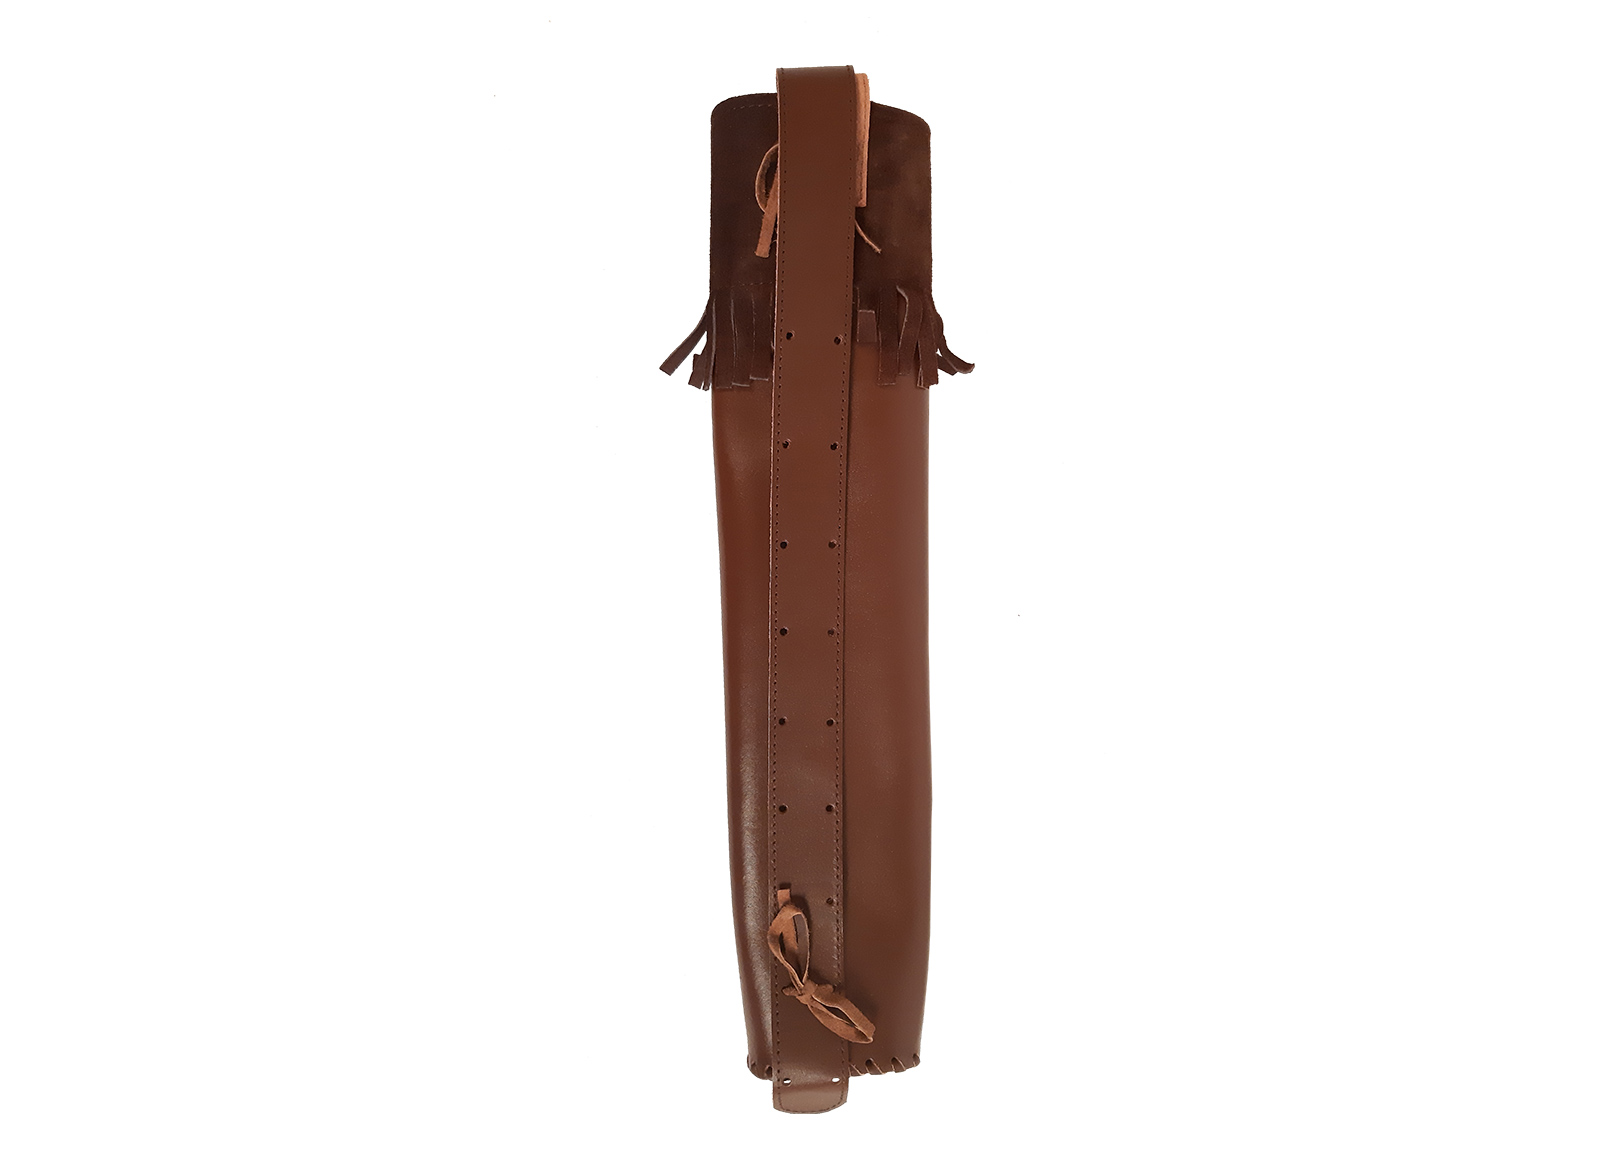 ALPEN ARCHERY BACK QUIVER RH - BROWN LEATHER WITH FRINGES